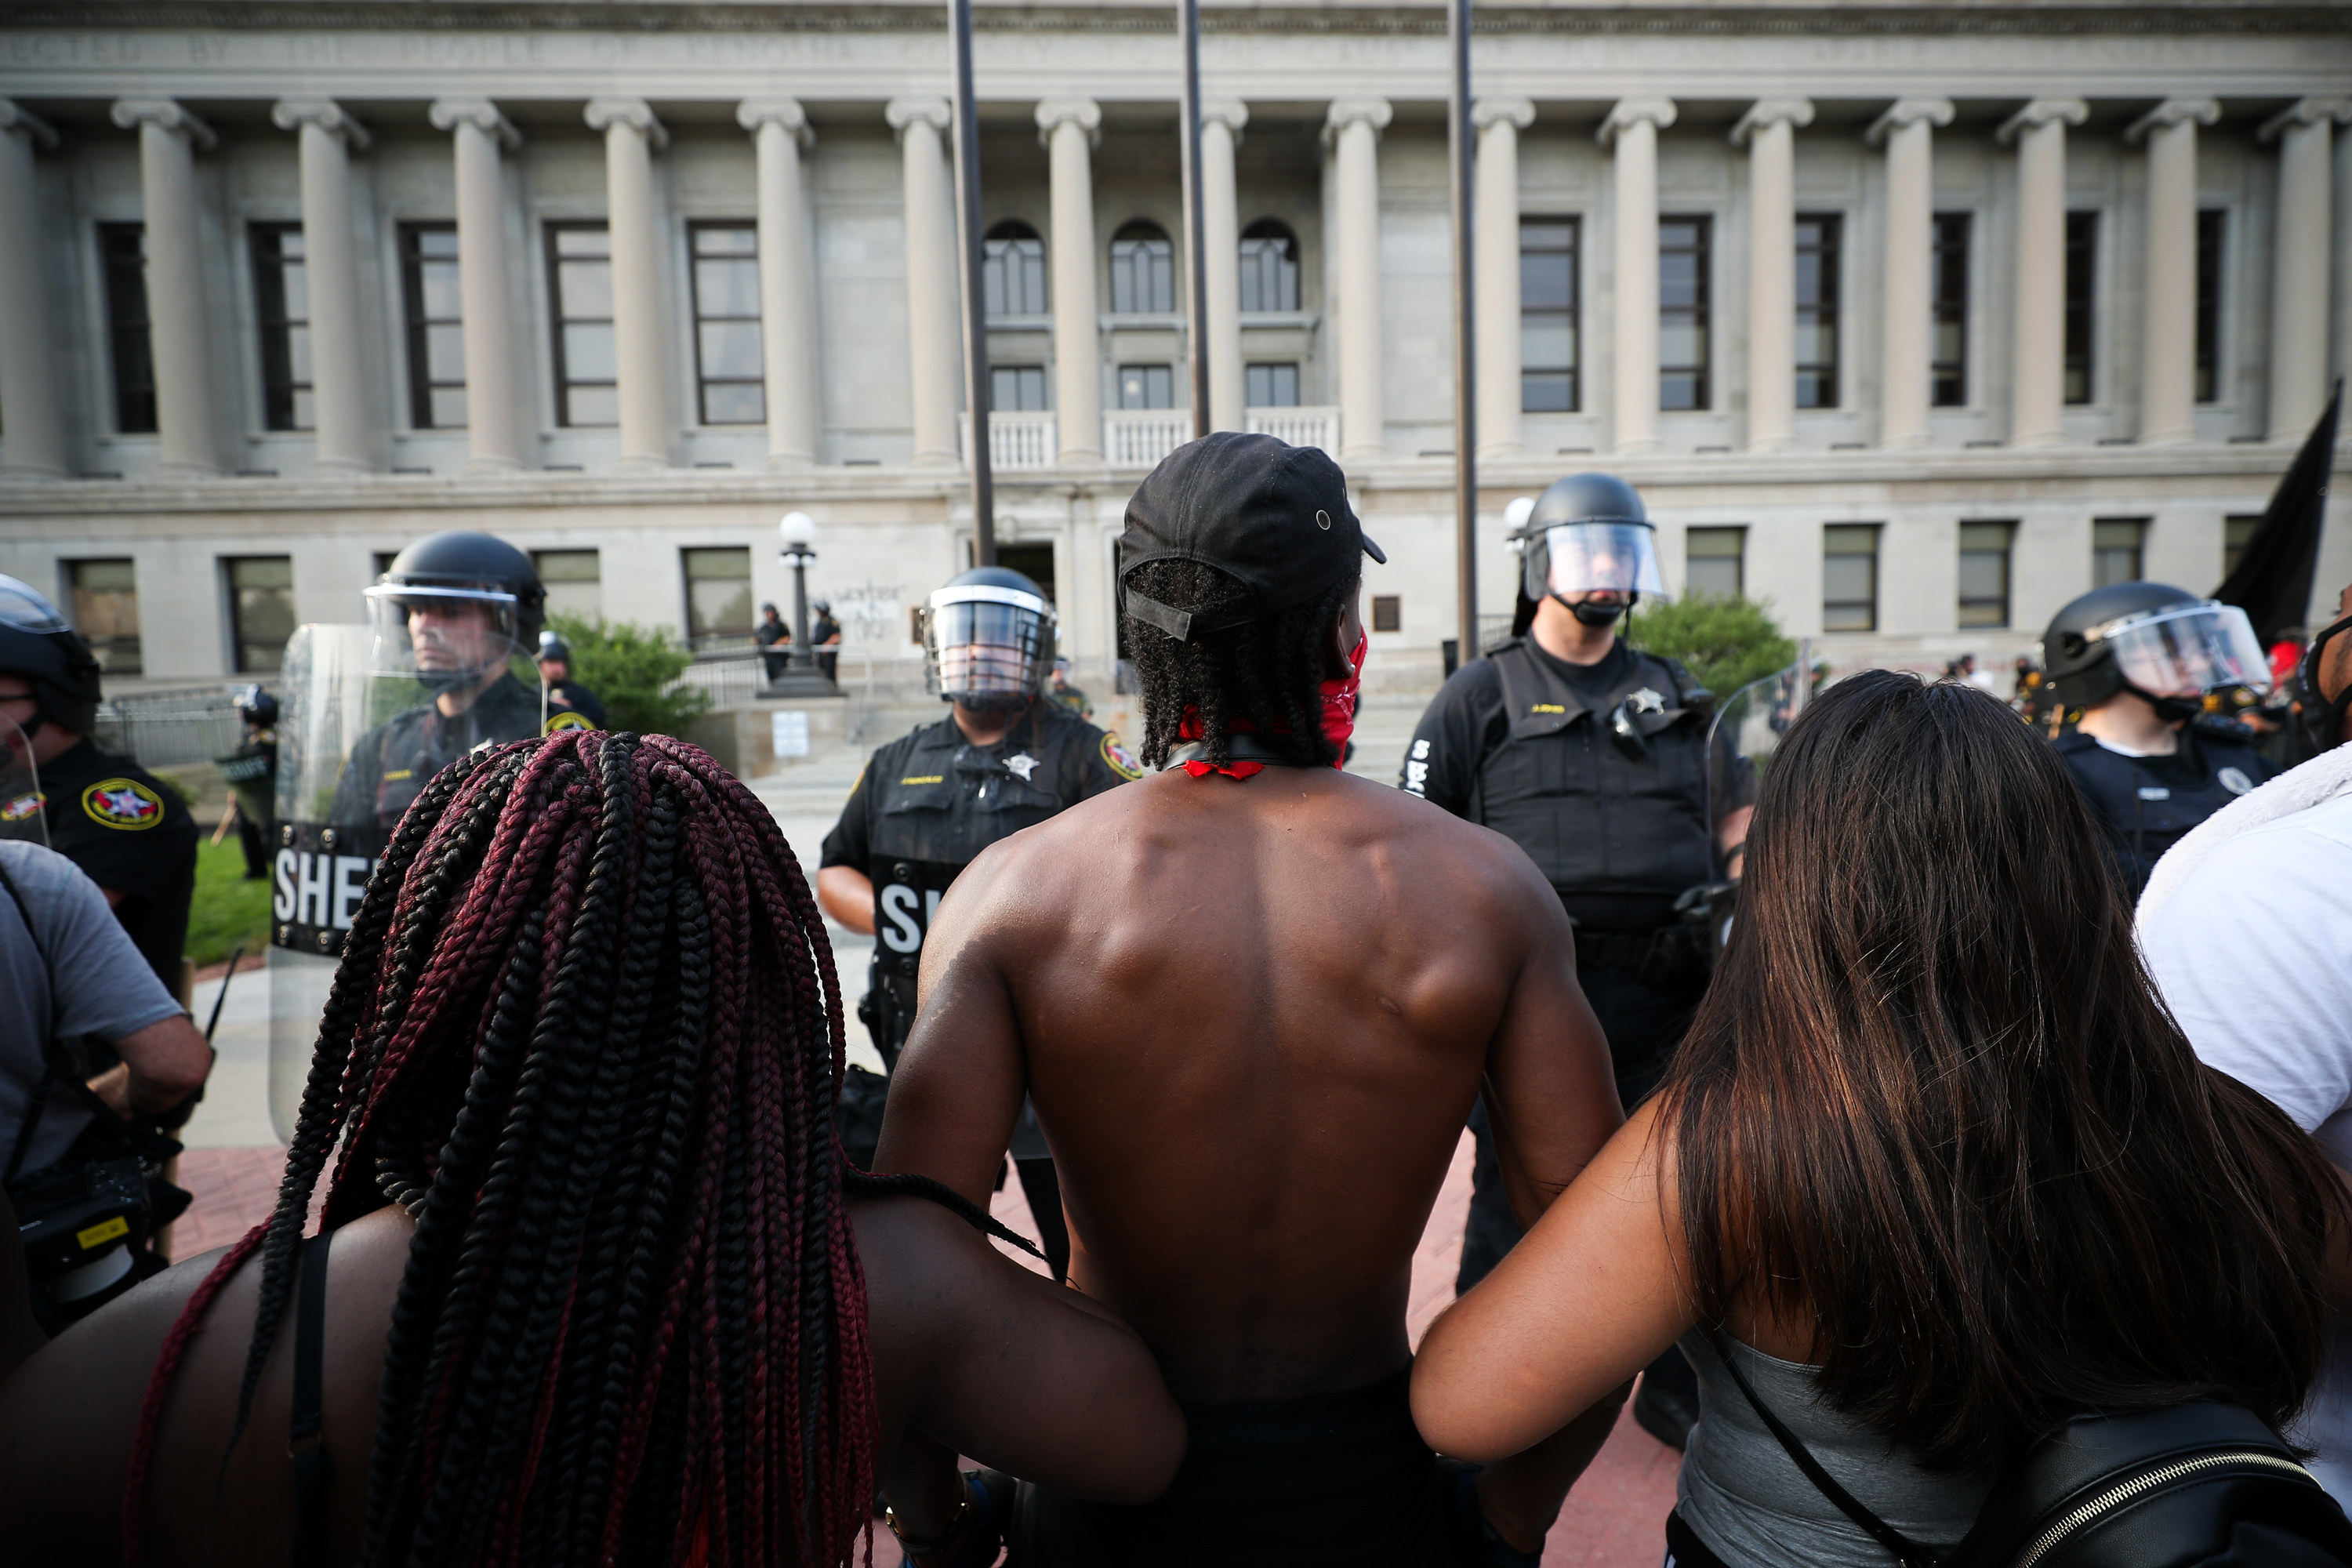 A black man from behind with his arms linked to other protesters faces off with police in riot gear in front of the courthouse